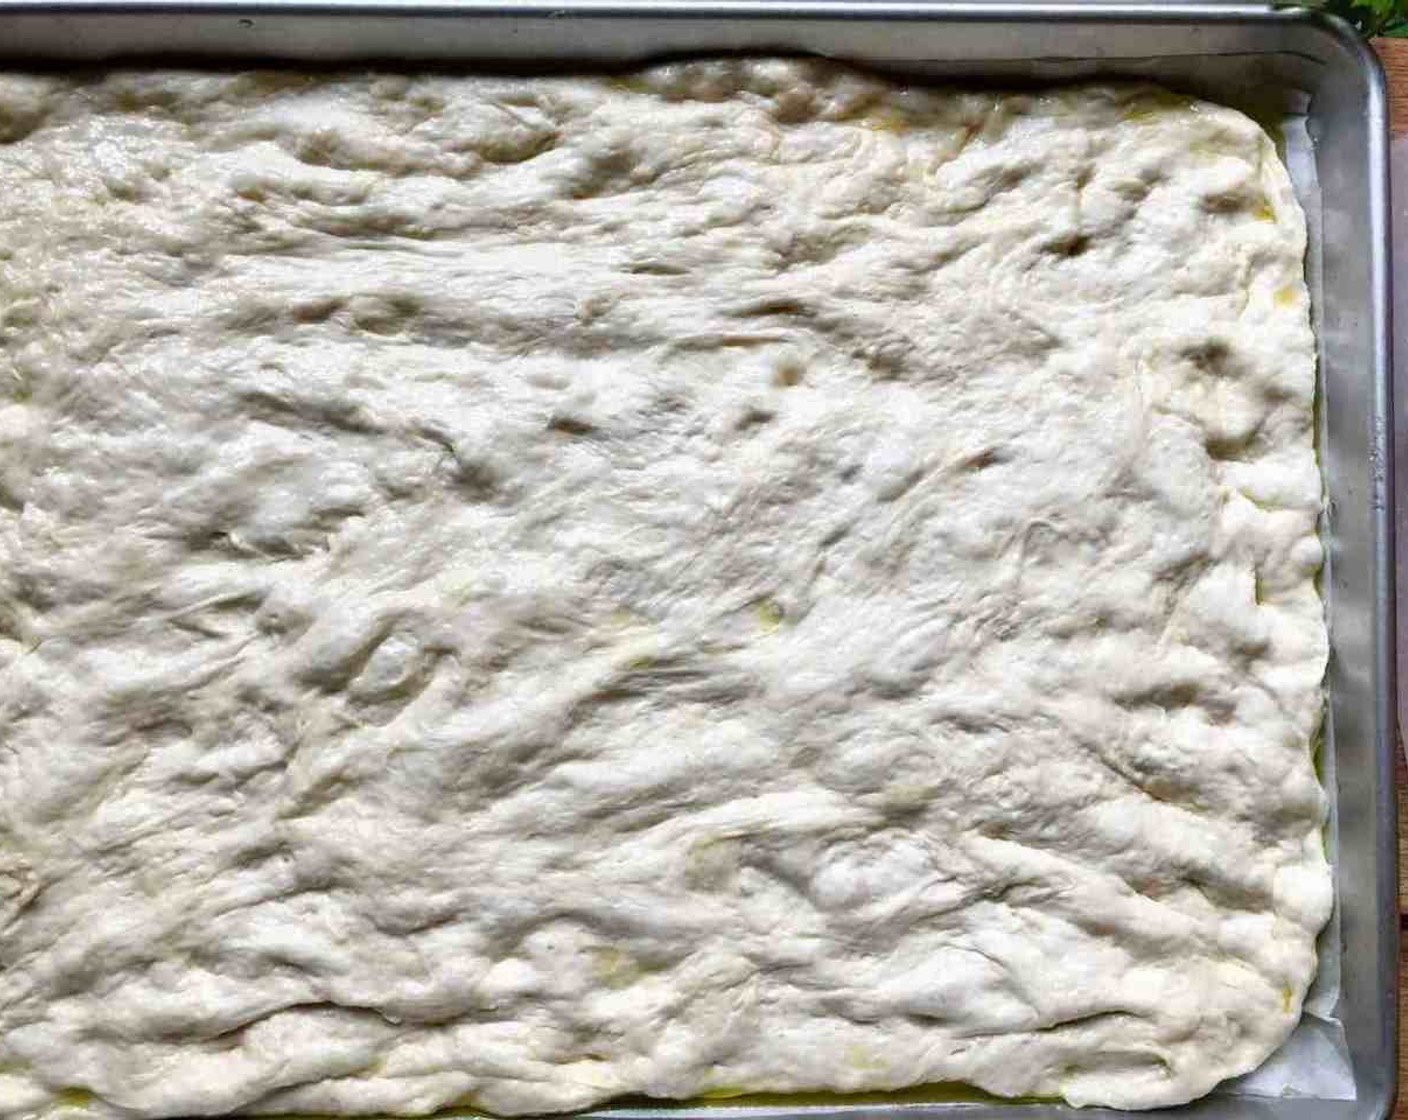 step 11 With lightly greased hands, press down on the dough, using all 10 fingers to dimple and stretch the dough outward. Pull gently on the ends and stretch them toward the corners of the sheet pan. If the dough begins to resist being stretched, let it rest for 5 minutes, then stretch it again, continuing until it fits most of the sheet pan.